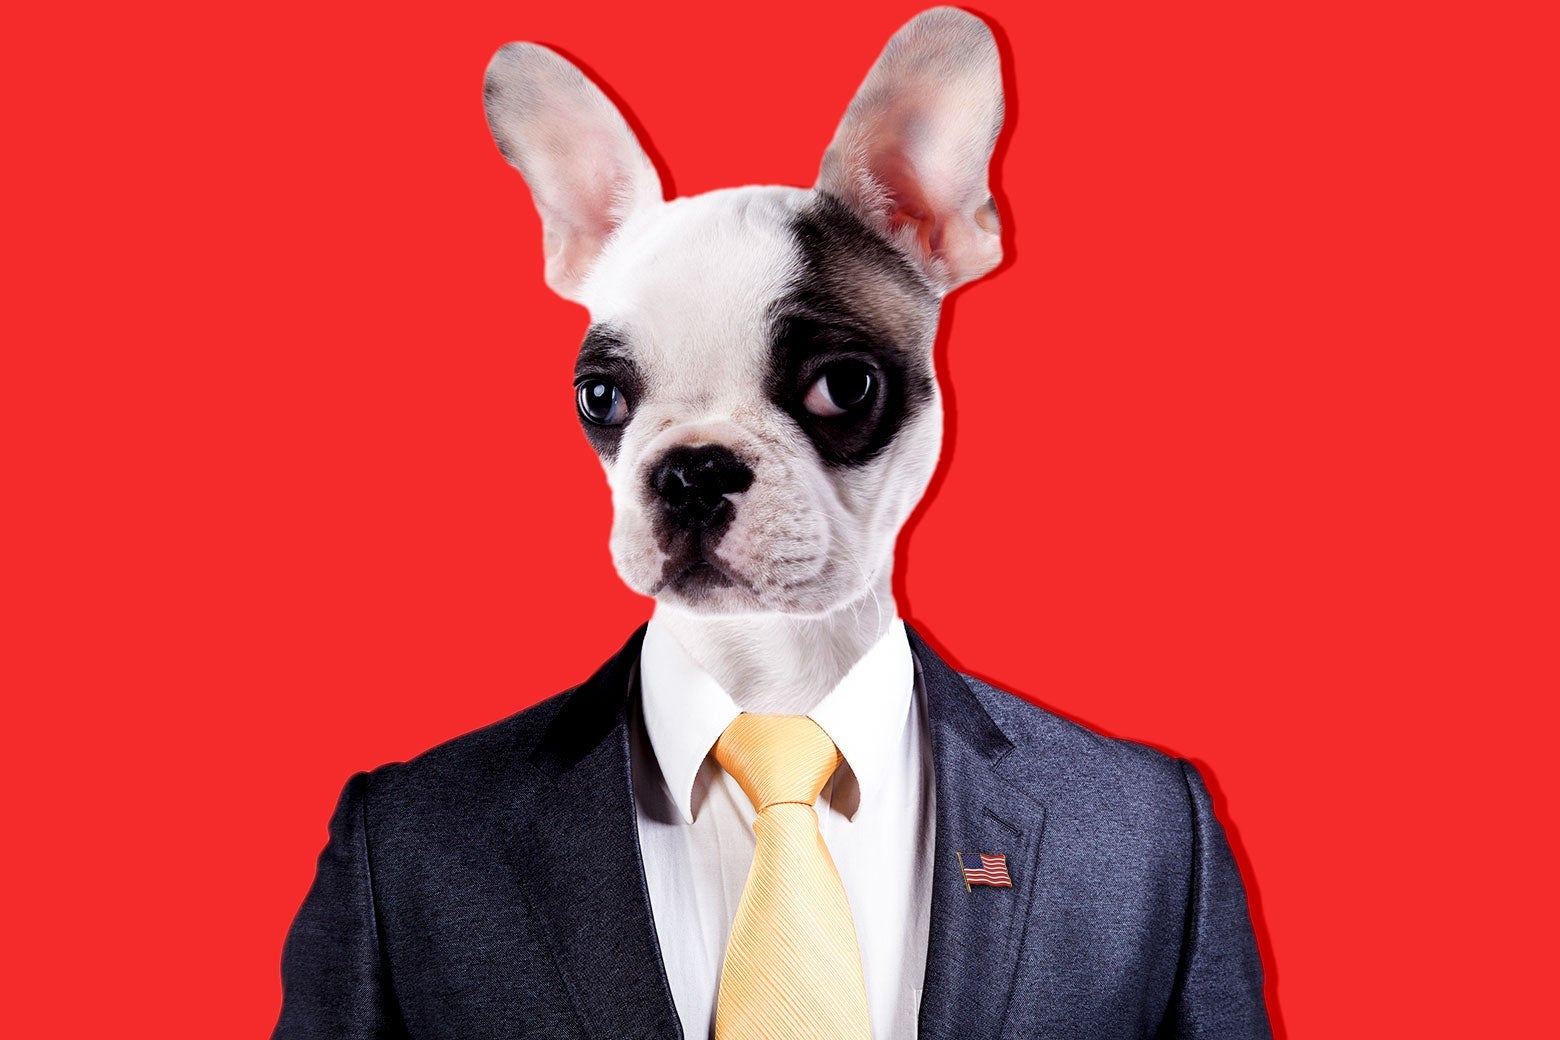 A dog looking presidential in a suit and tie